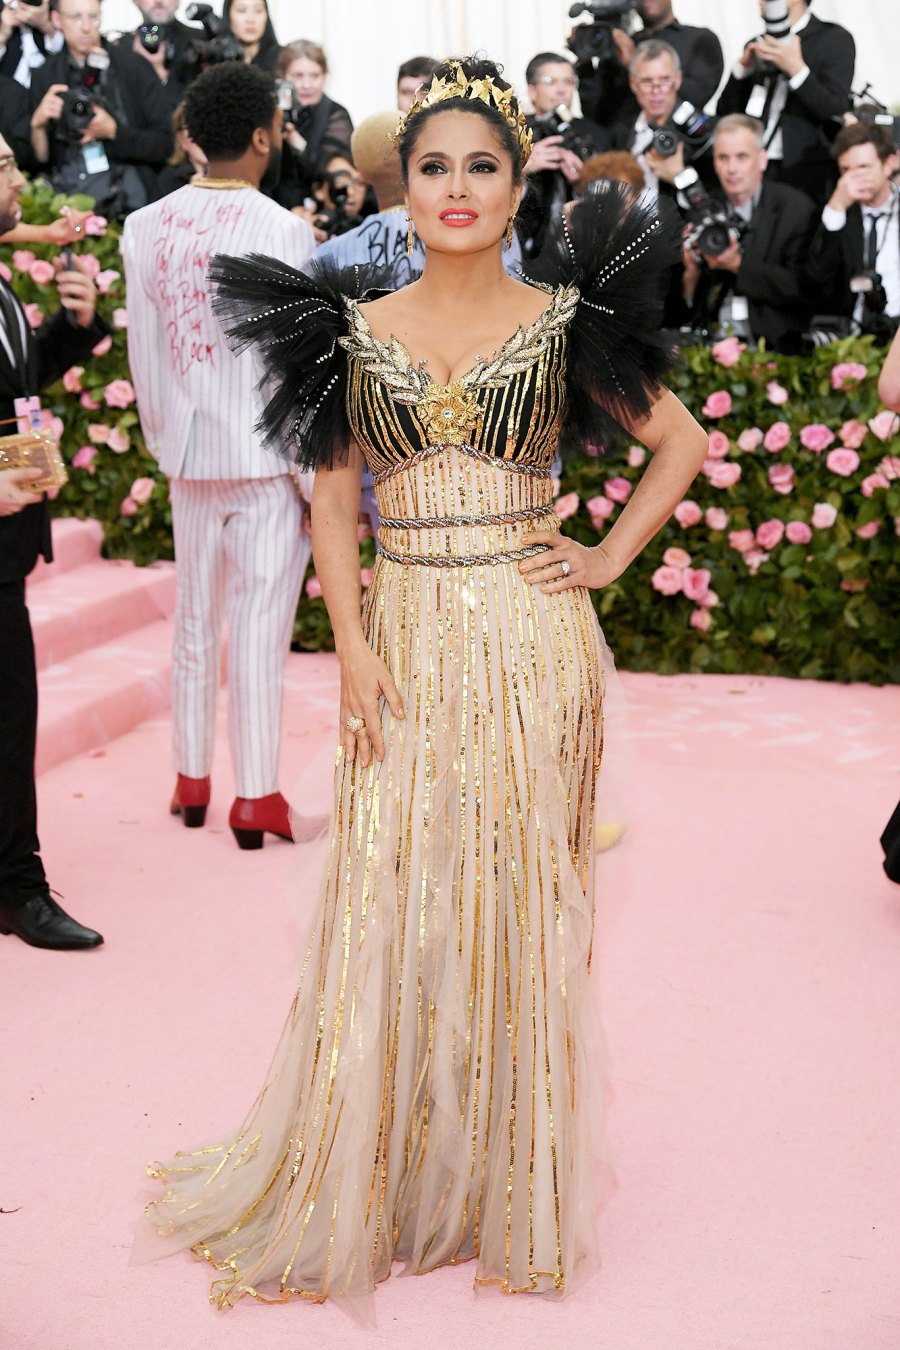 Met Gala 2019 Red Carpet Fashion See Celeb Dresses, Gowns